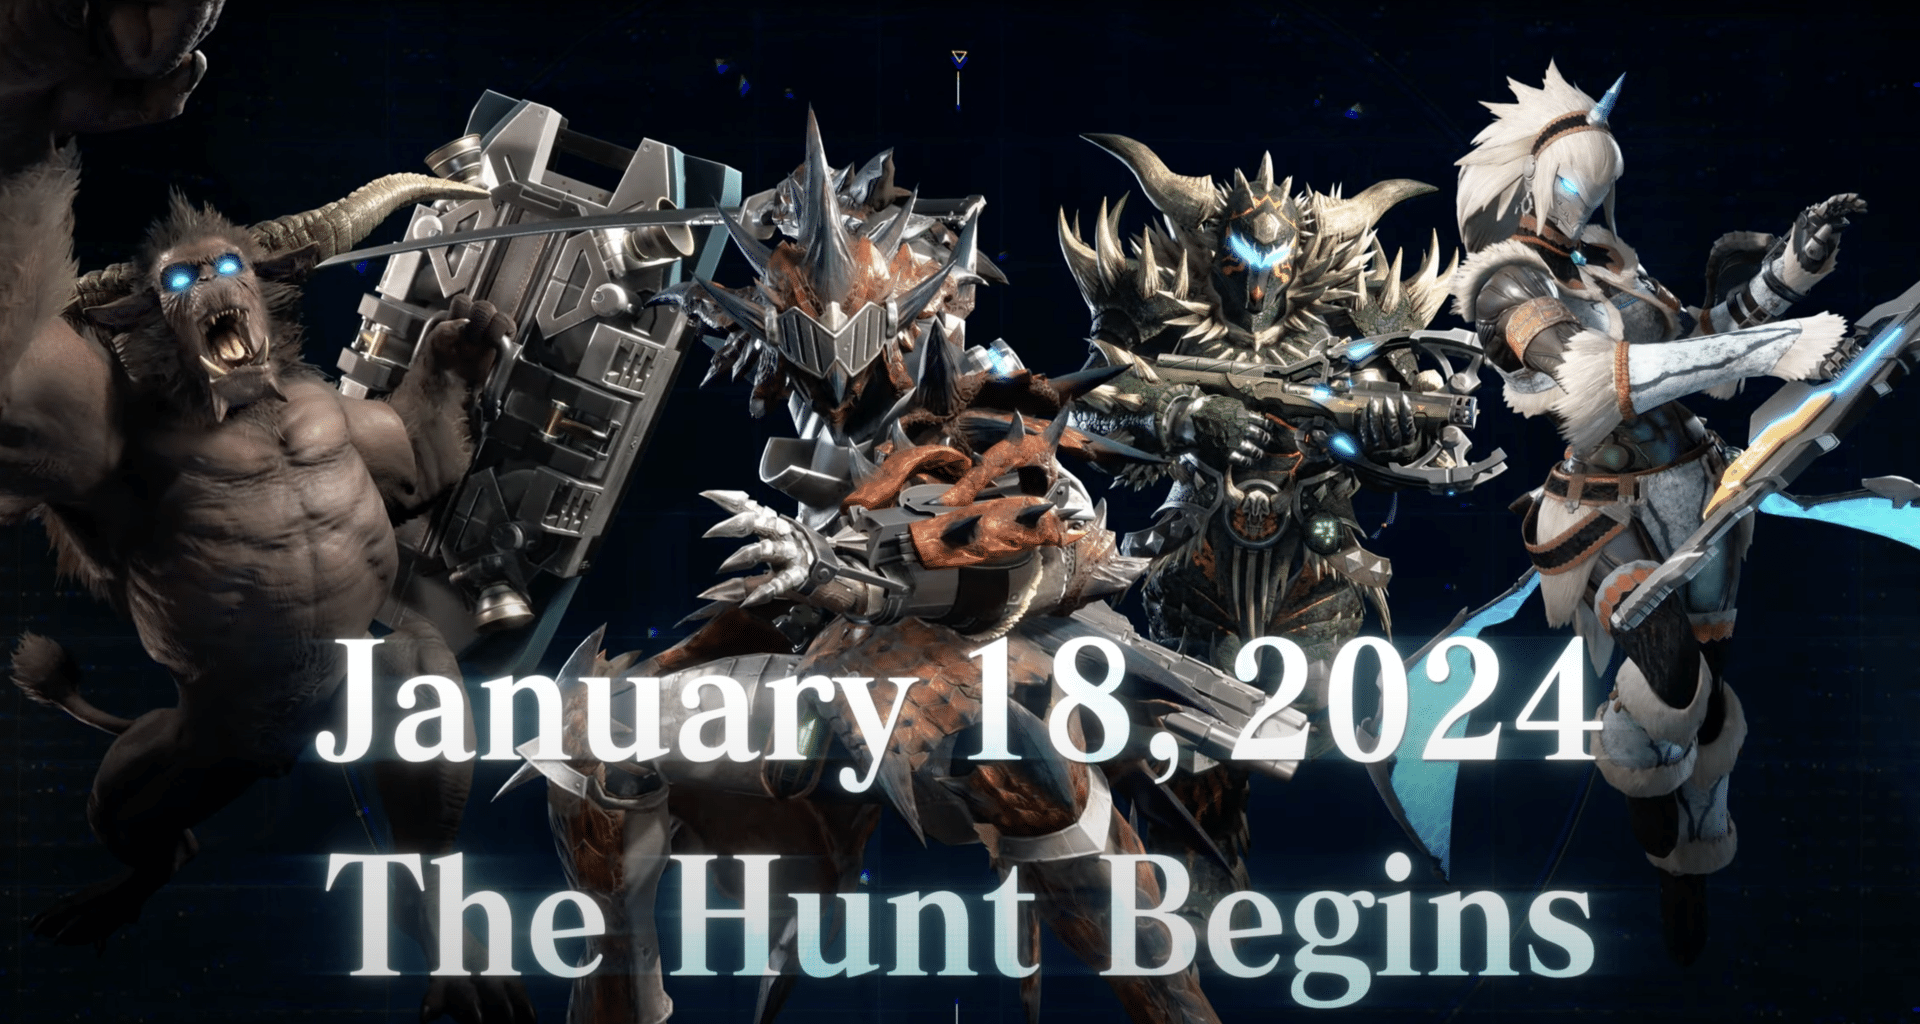 Exoprimal's Monster Hunter Collaboration Looks to be an Exciting Addition 34534